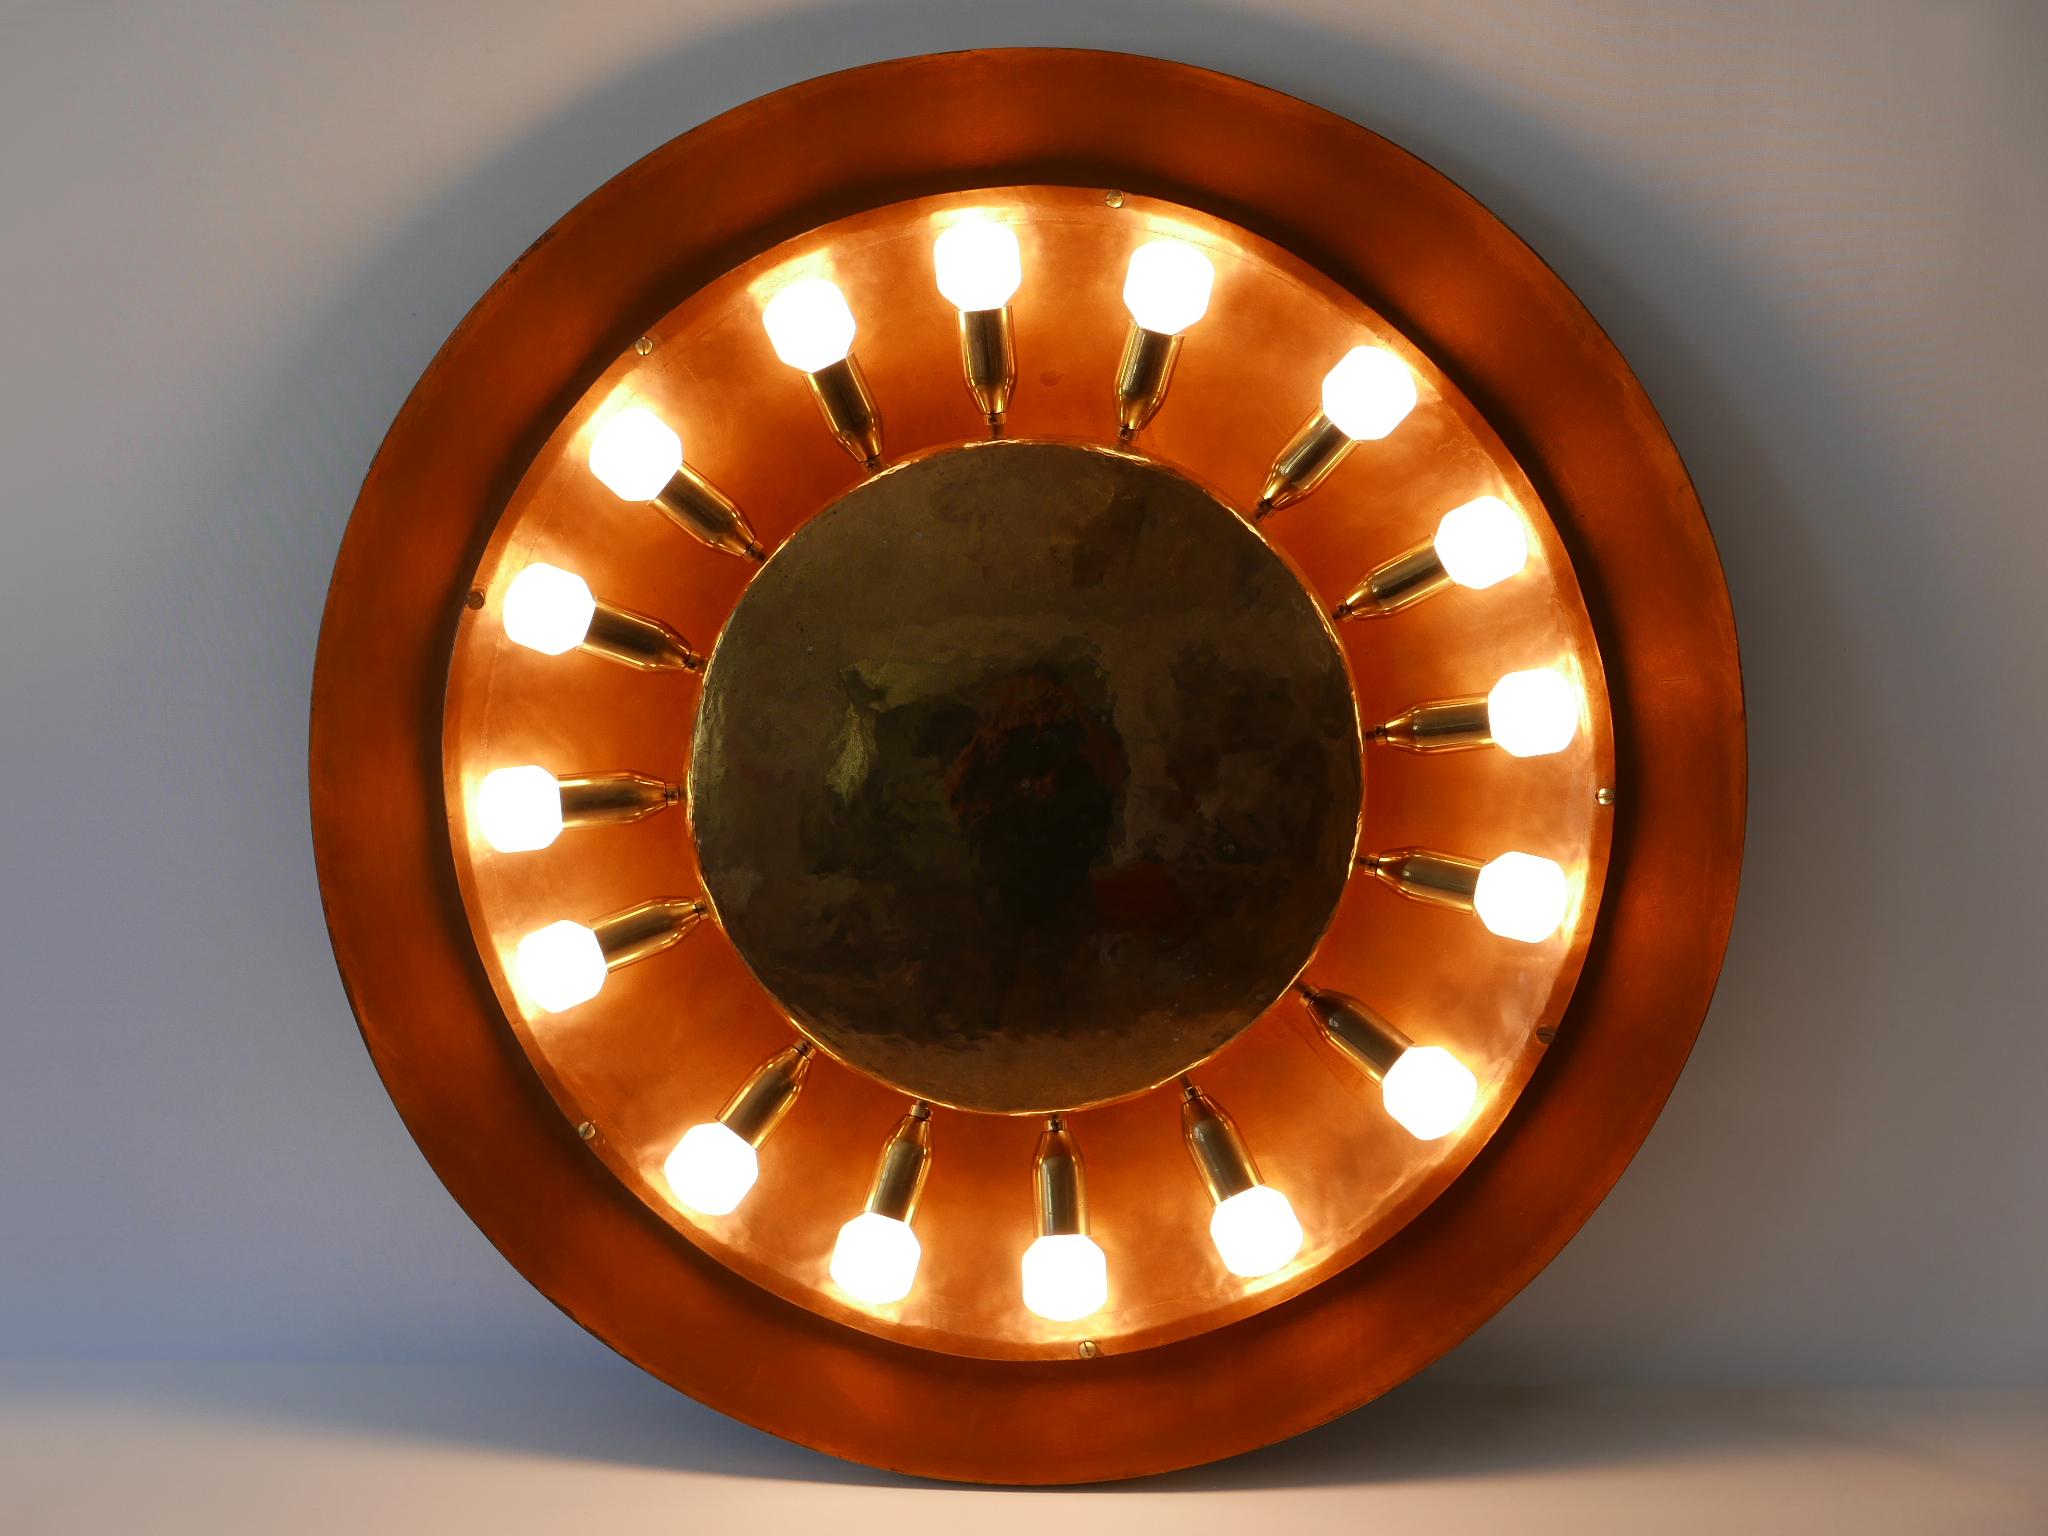 Huge, gorgeous 19-flamed Mid-Century Modern flush mount or wall lamp. Probably custom made in Germany, 1960s.

Executed in copper and brass. The lamp comes with 19 x E14 / E12 Edison screw fit bulb holders, is wired and in working condition. It